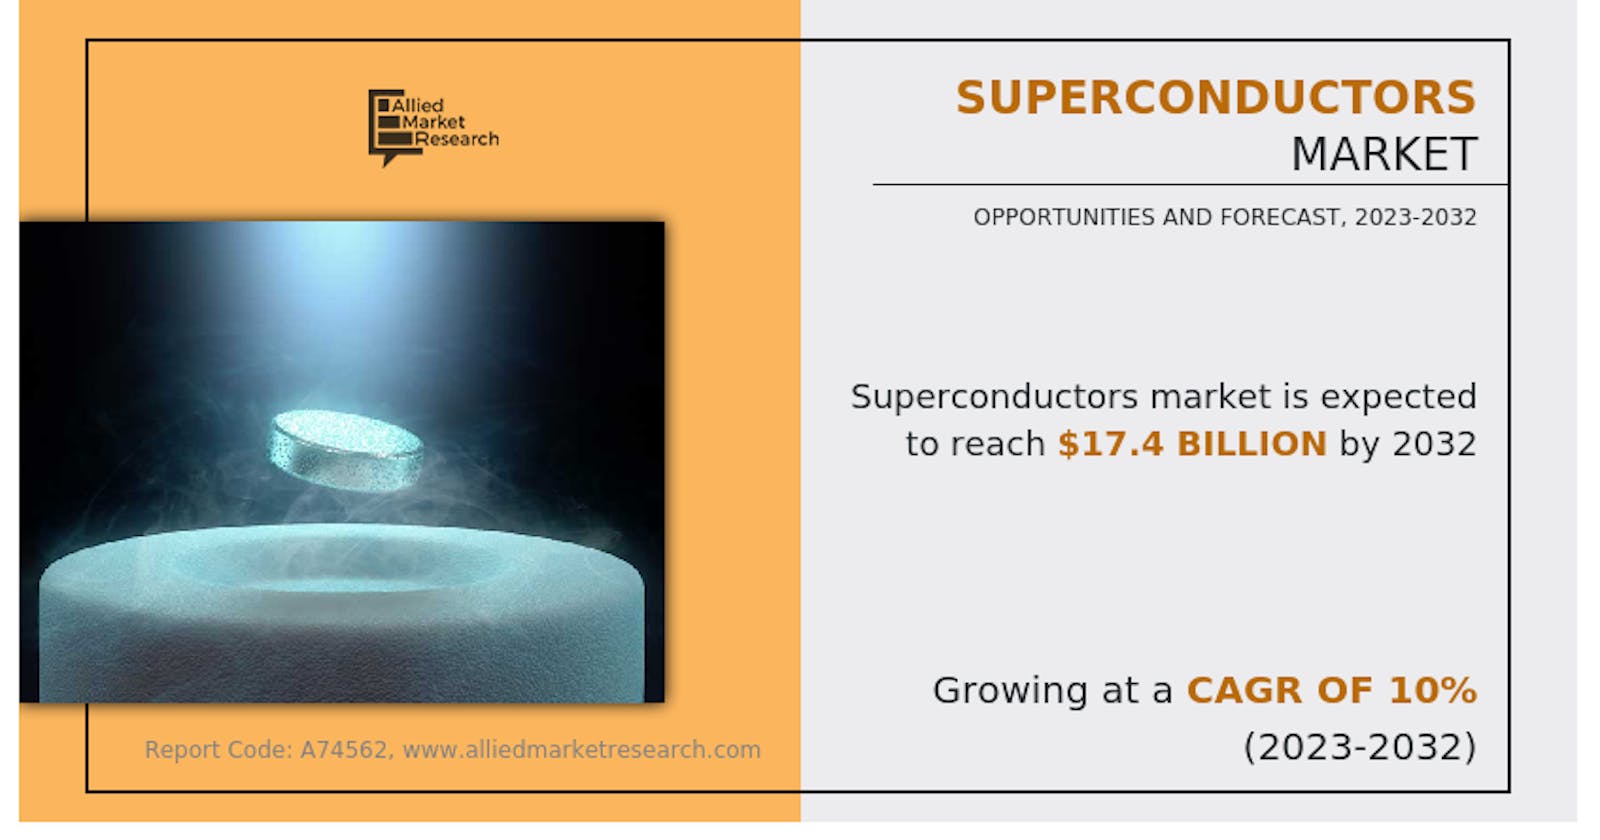 Superconductors Market to Reach $17.4 Billion by 2032